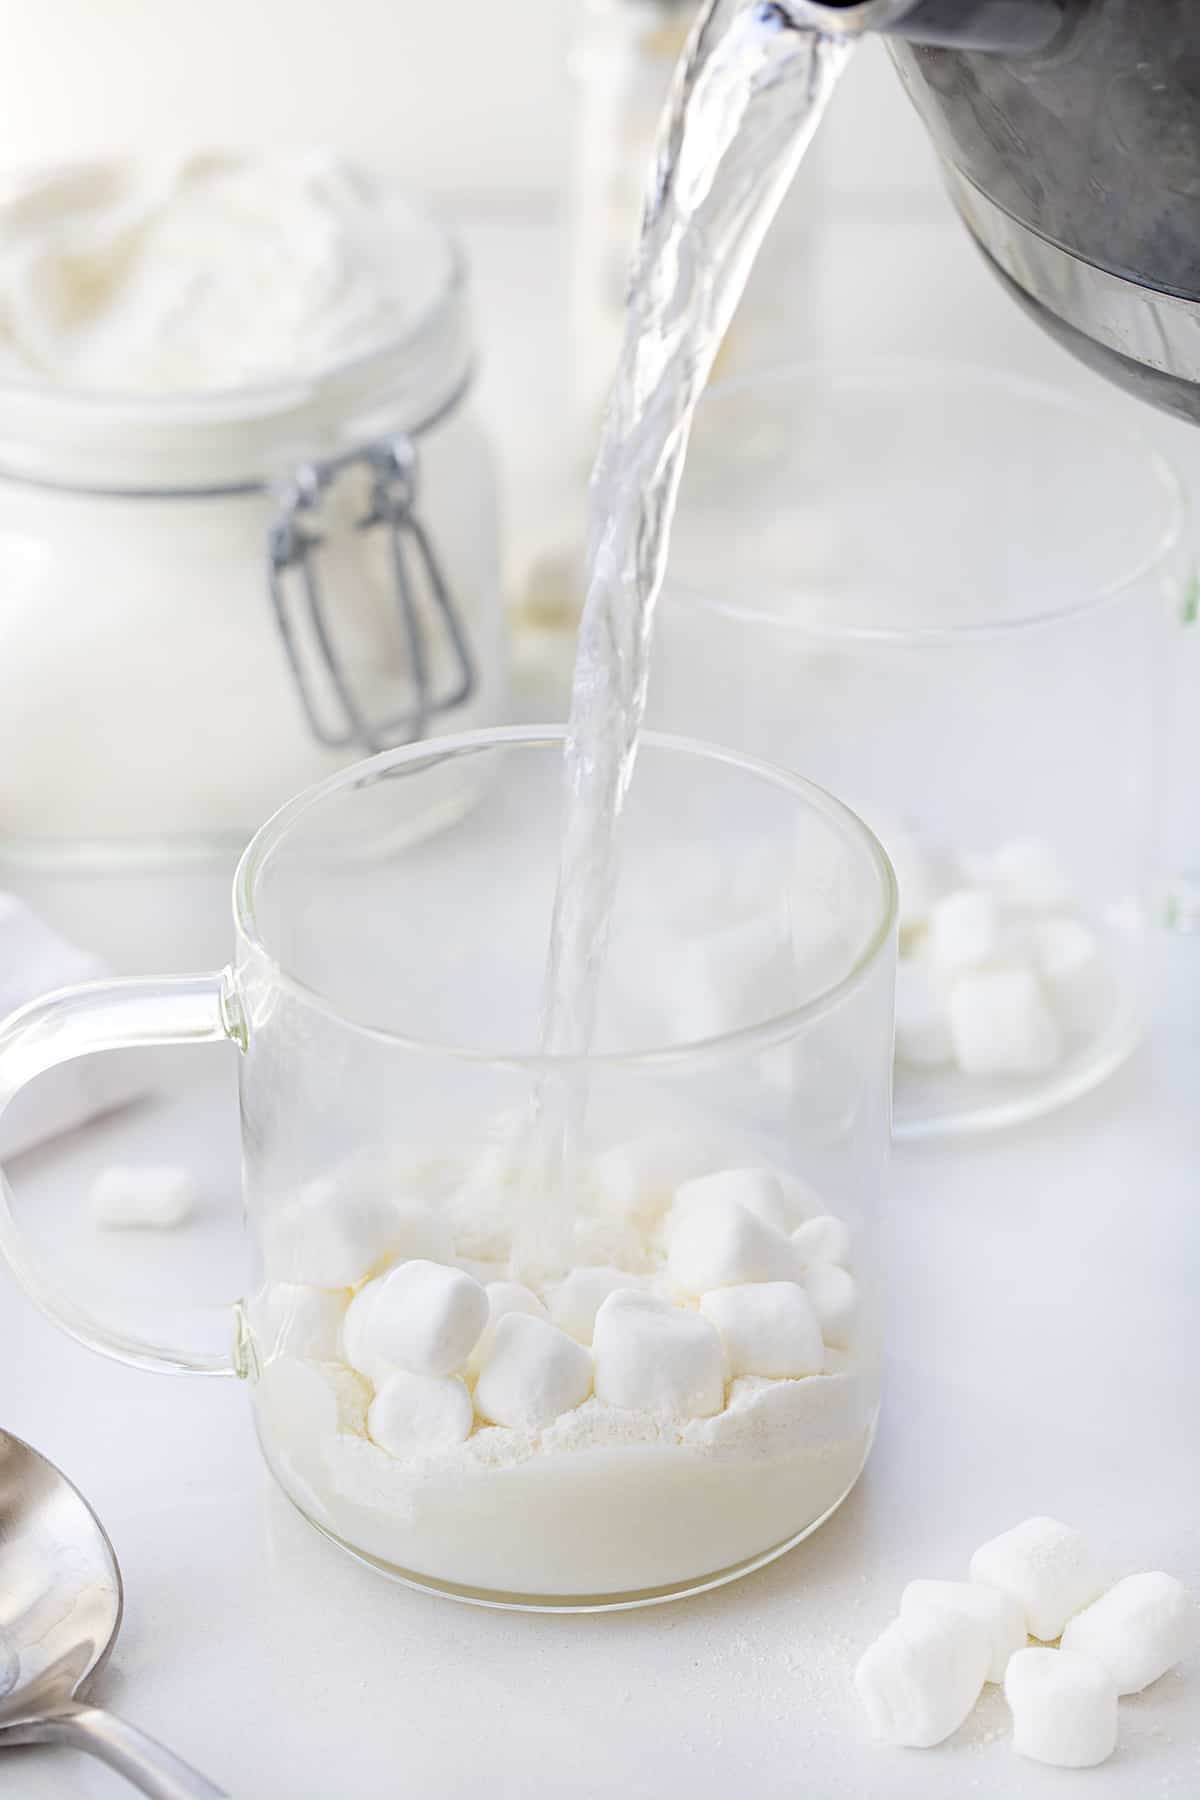 Pouring Hot water over white chocolate hot cocoa mix and mini marshmallows in a clear glass.